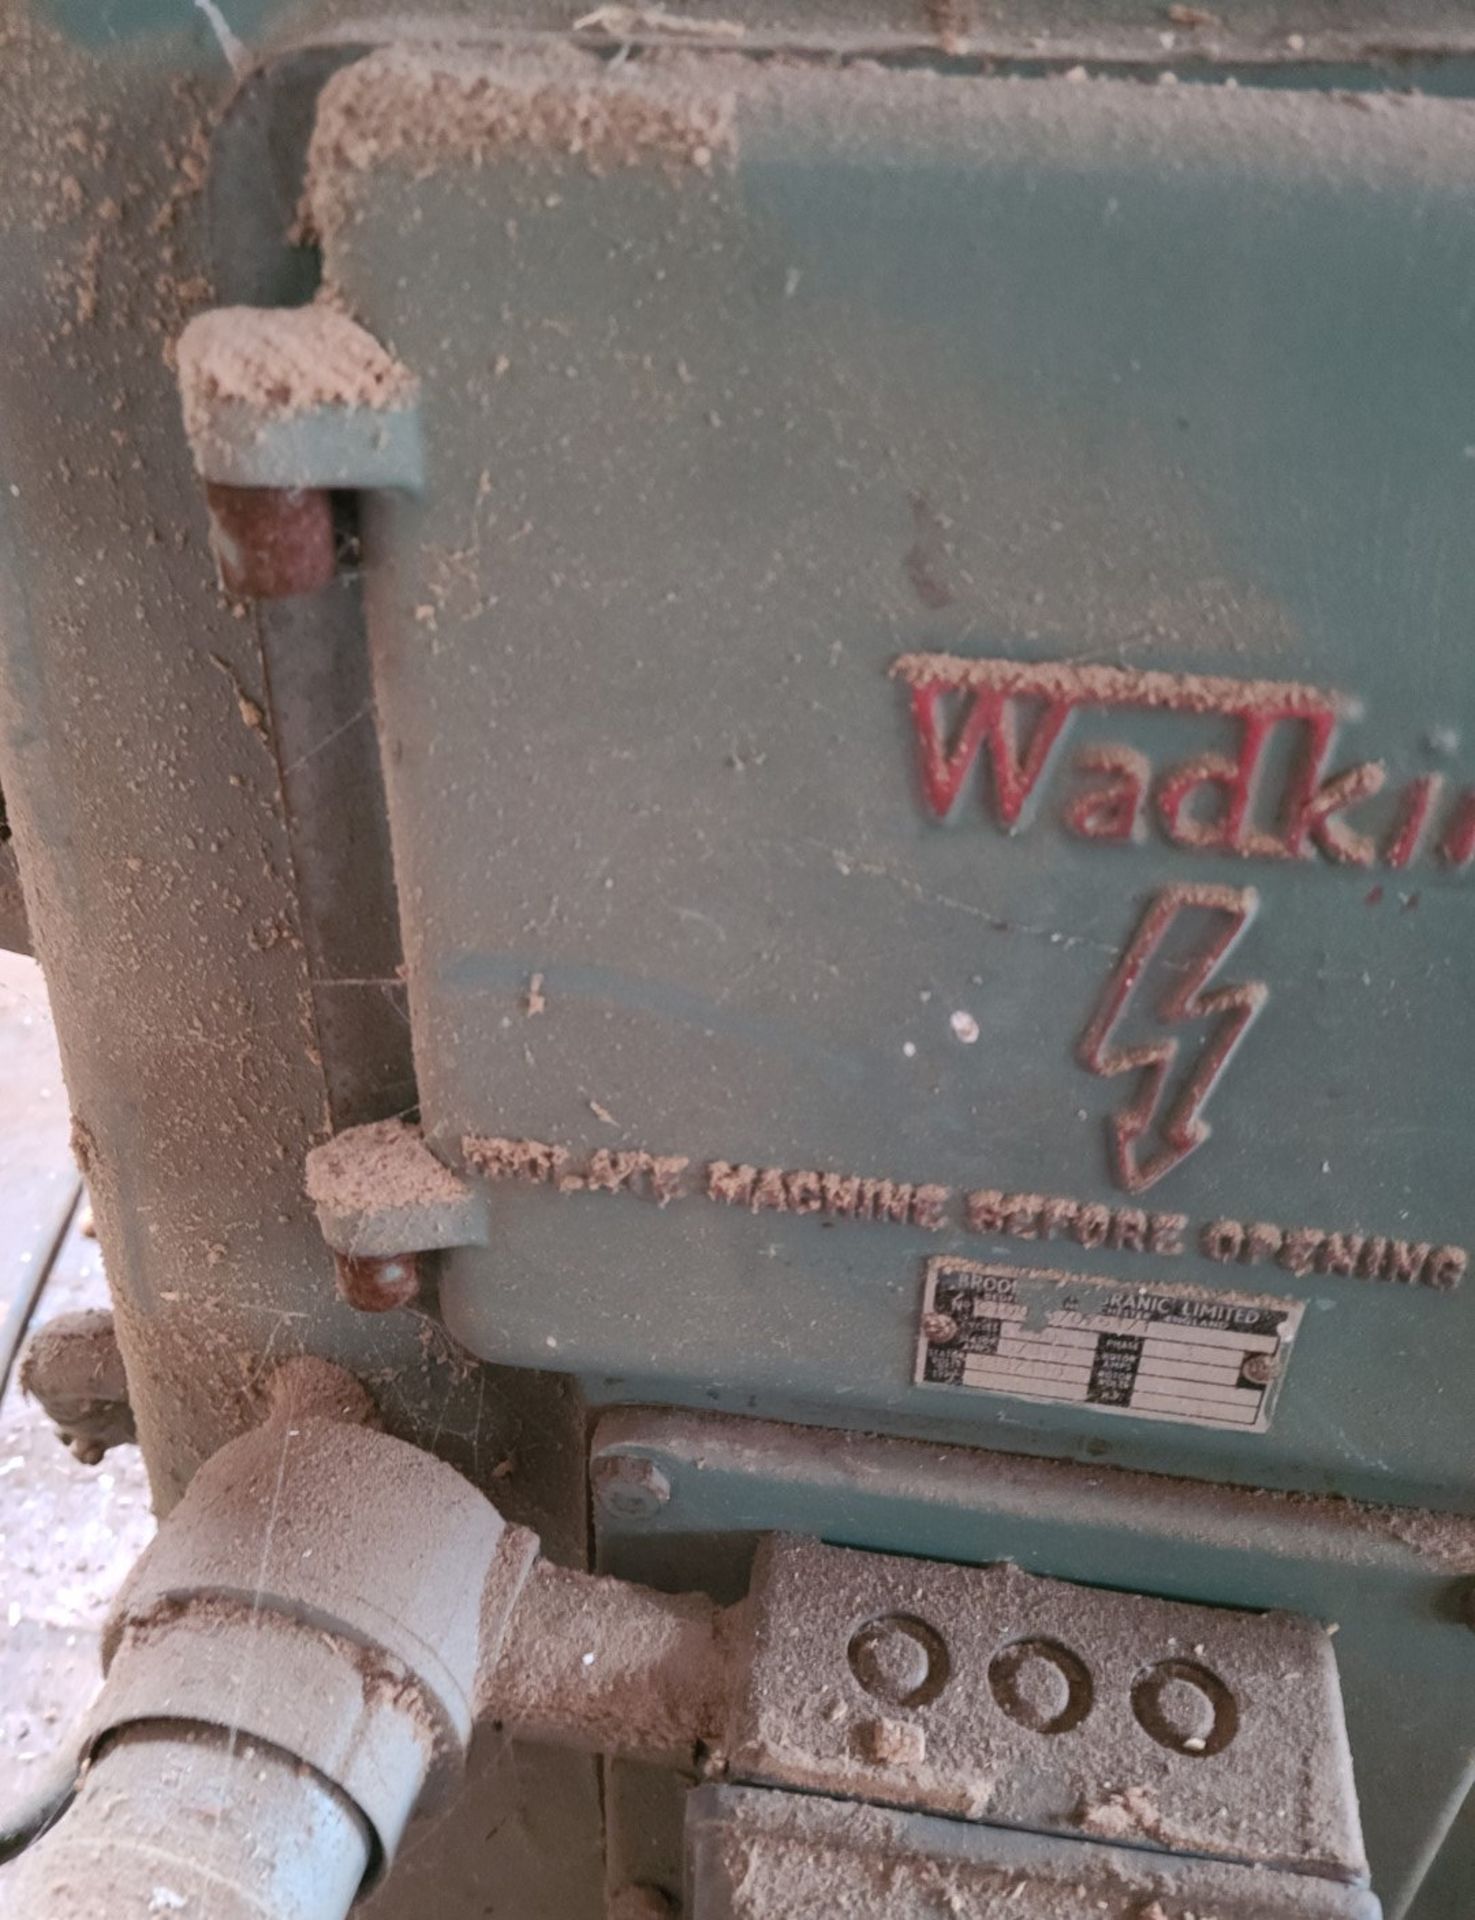 1 x Wadkin 3 Phase Eq2597 Spindle Moulder - Ref: CNT232 - CL846 - Location: Oxford OX2 - Image 20 of 25